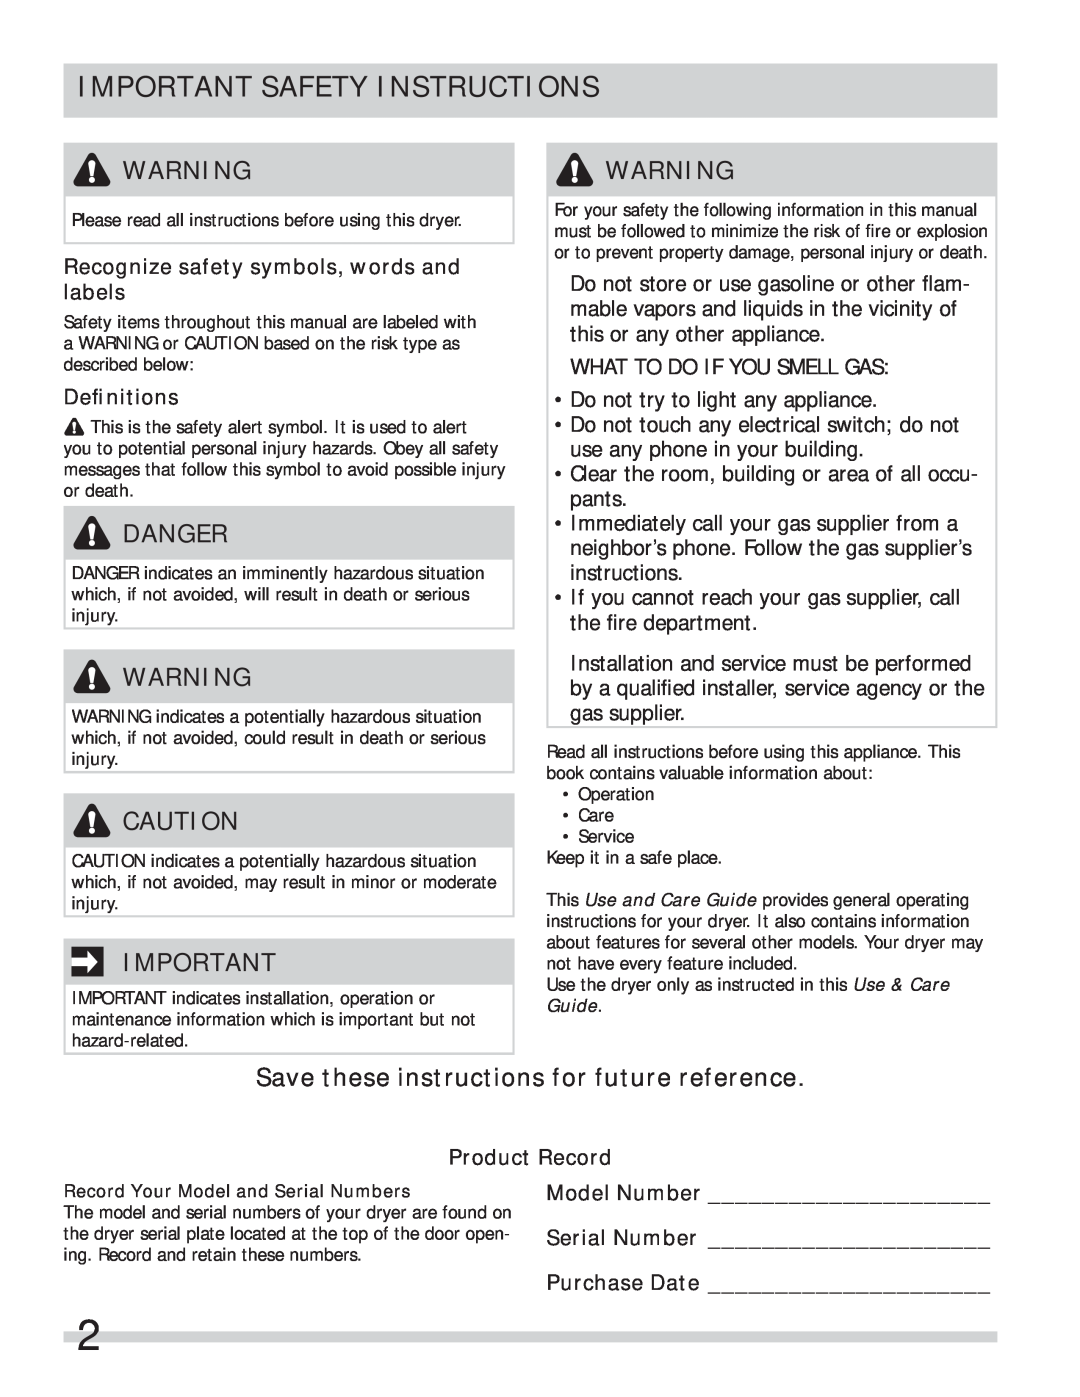 Frigidaire 137409900A(1111) Important Safety Instructions, Recognize safety symbols, words and labels, Deﬁnitions, Danger 